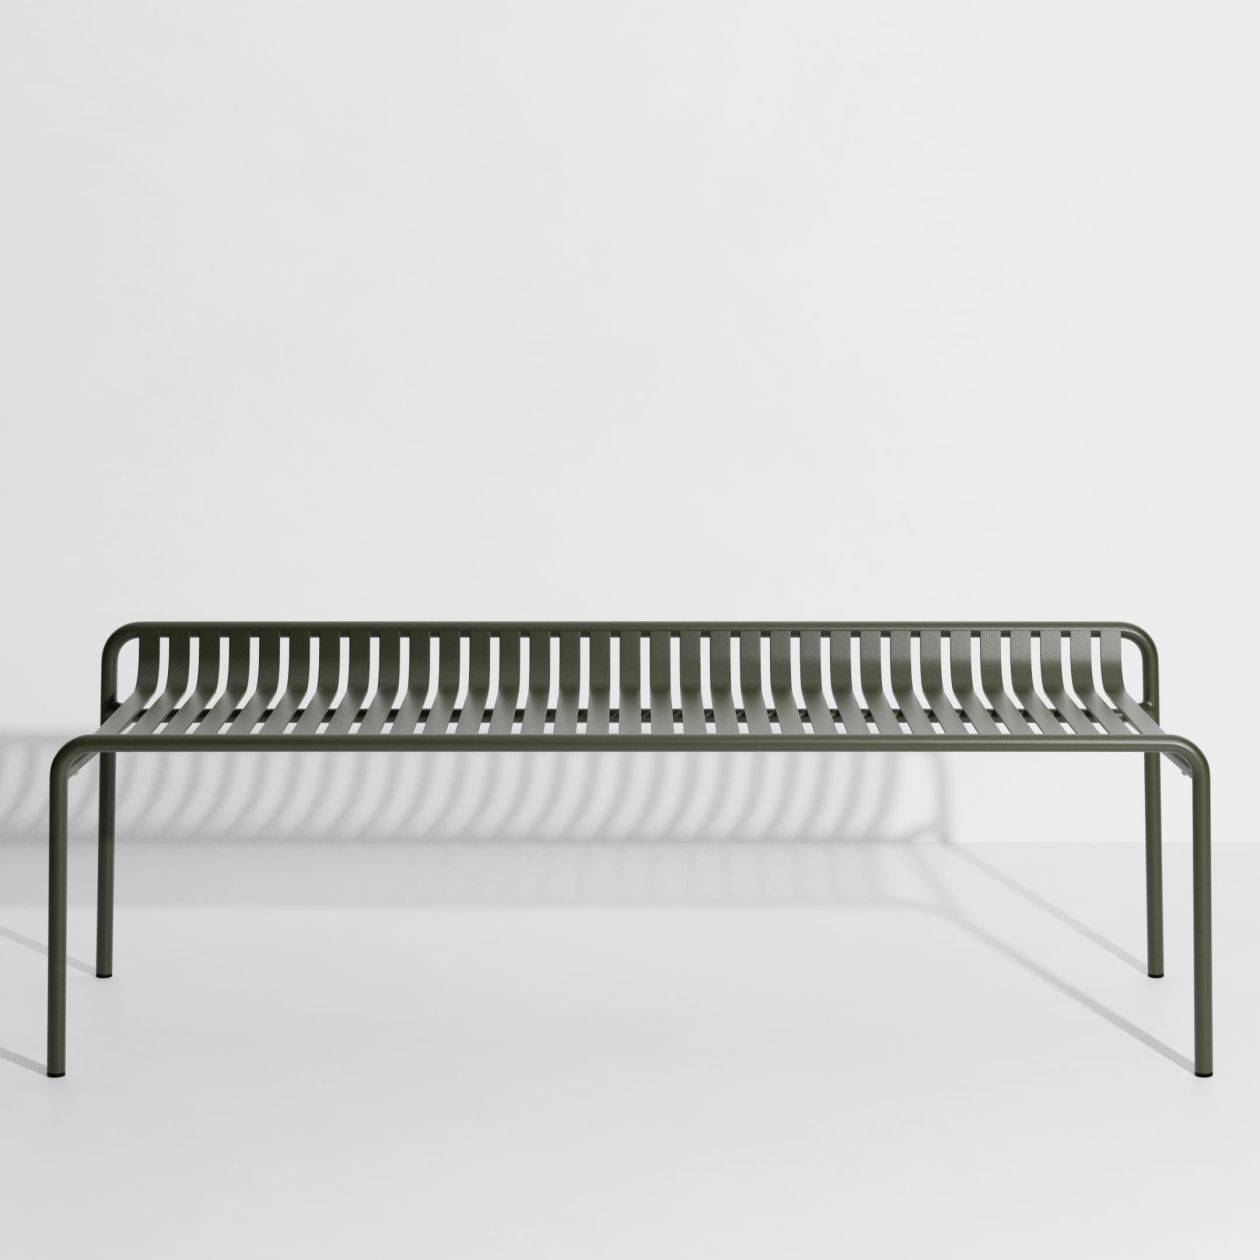 Week-End Backless Bench - Glass green